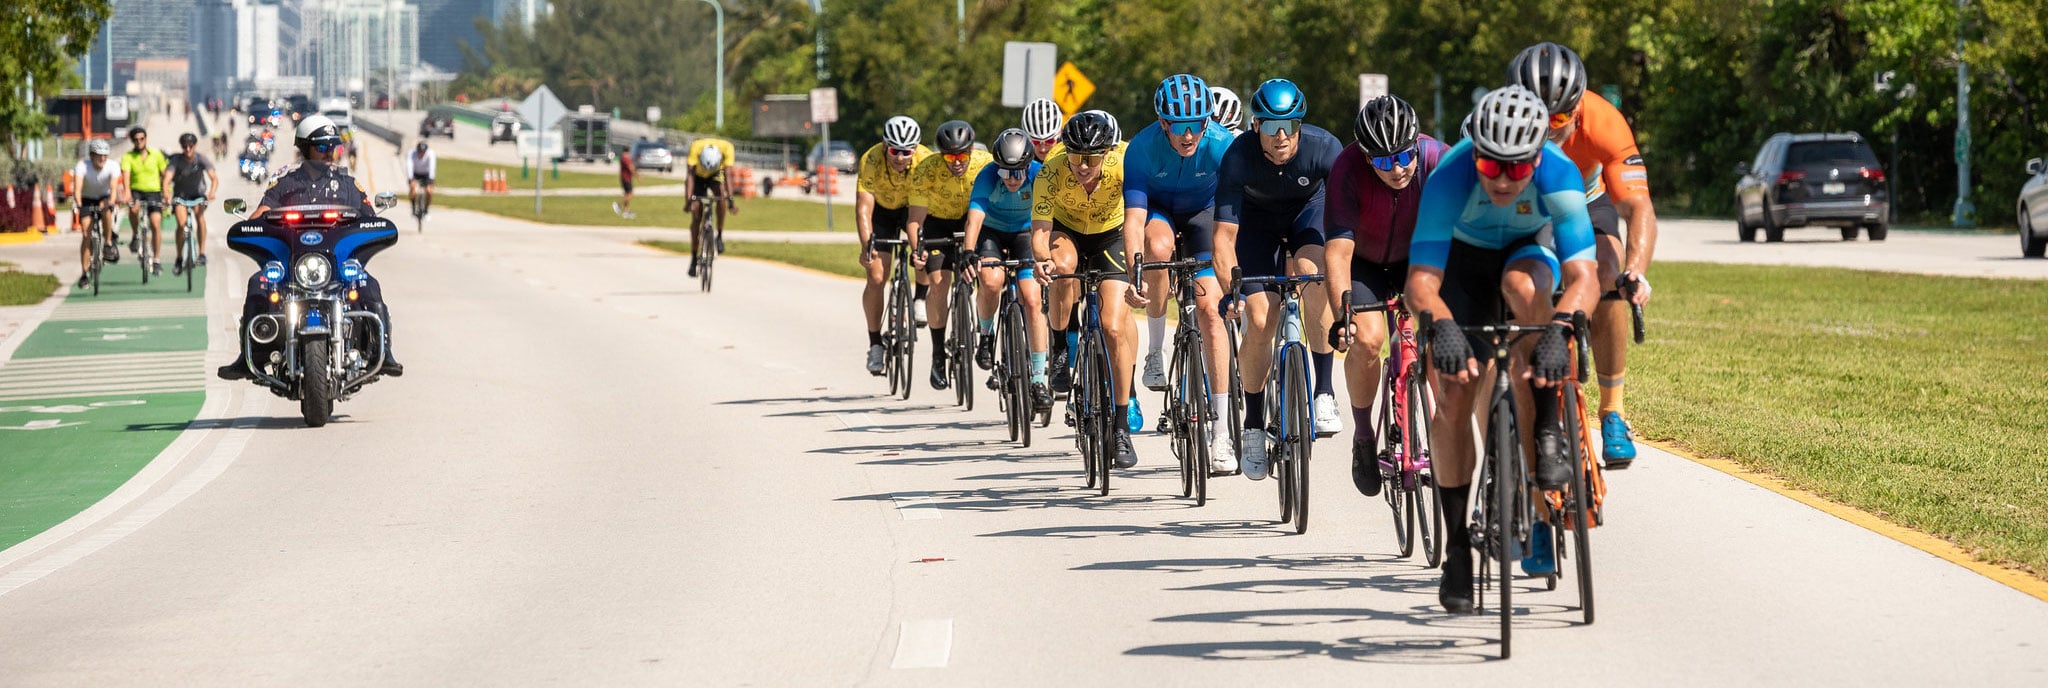 Members of the cycling club riding on key biscayne